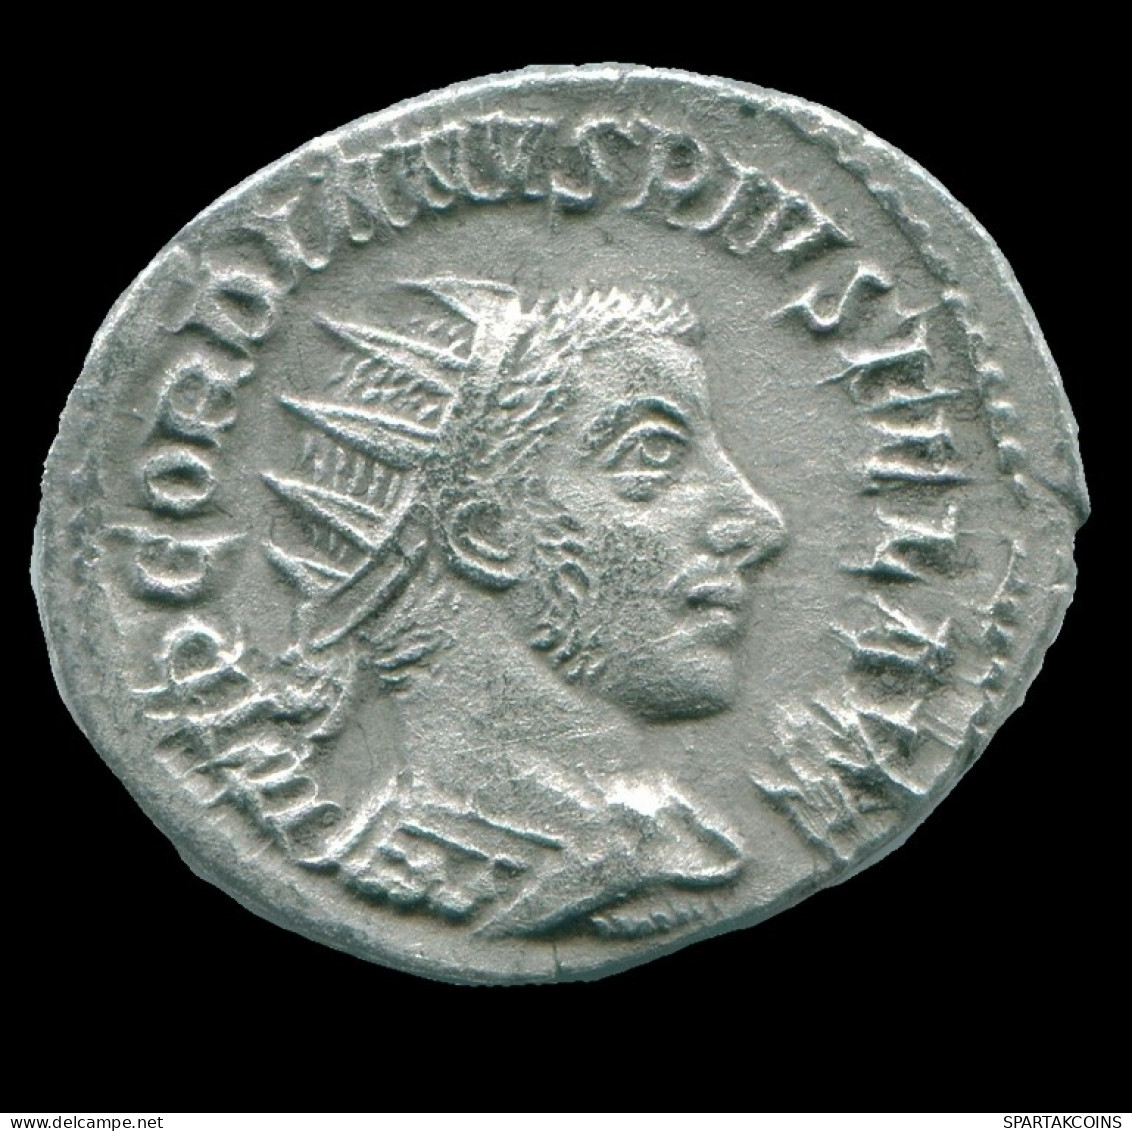 GORDIAN III AR ANTONINIANUS ANTIOCH Mint AD 243-244 ORIENS AVG #ANC13125.43.D.A - The Military Crisis (235 AD To 284 AD)